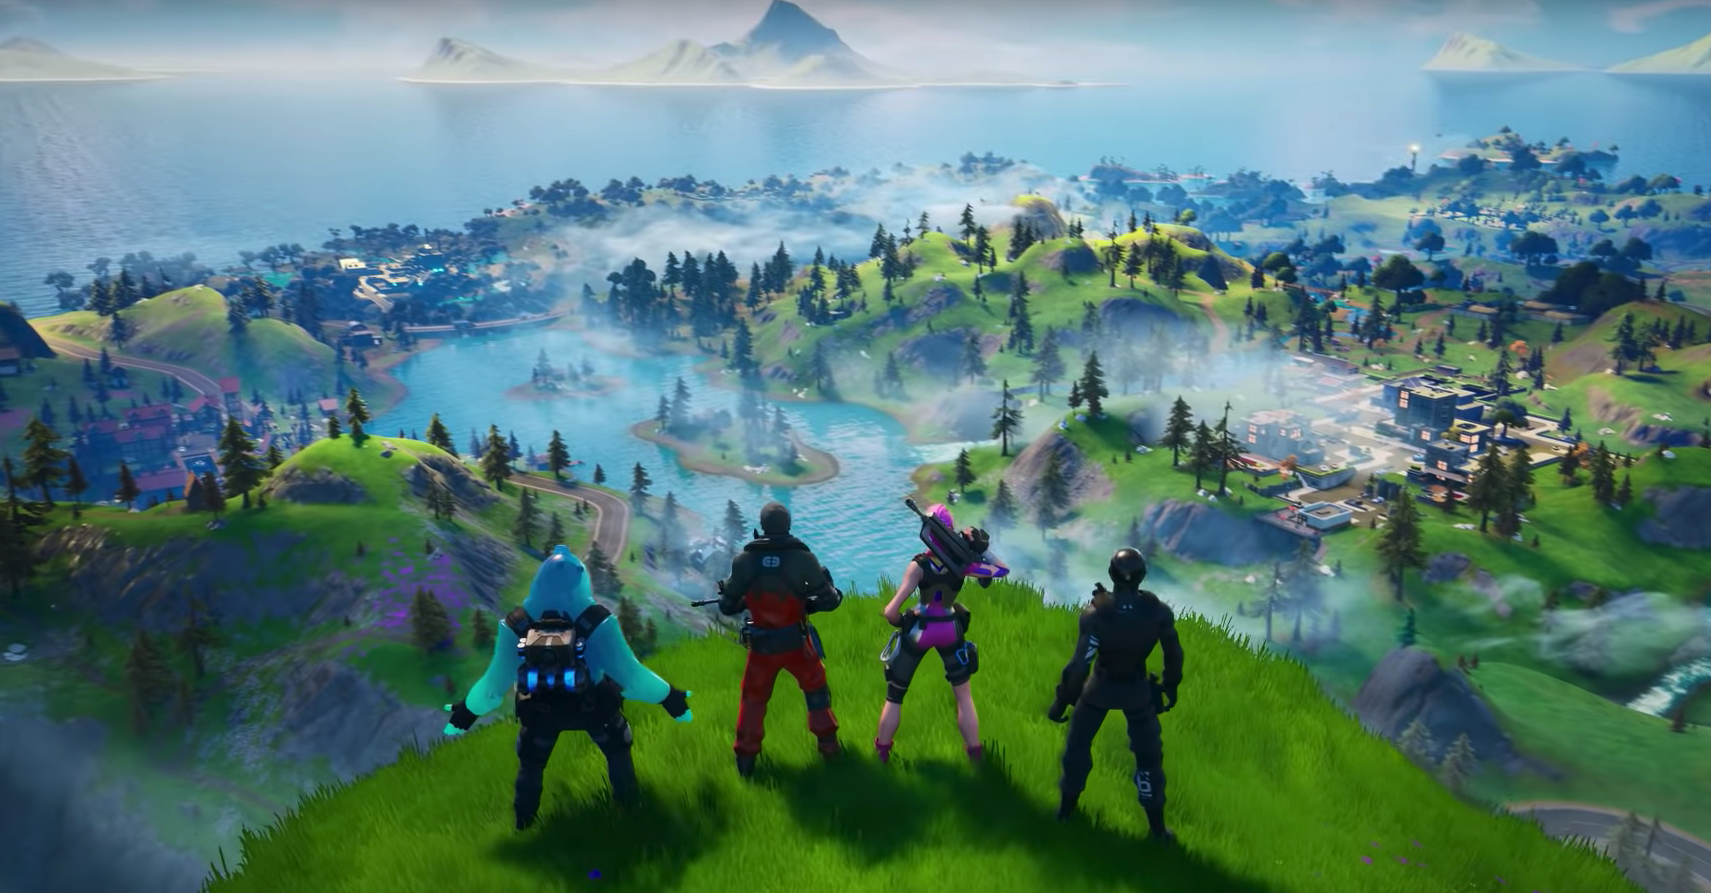 Overtime Buys Fortnite Team to Double Down on Esports Content